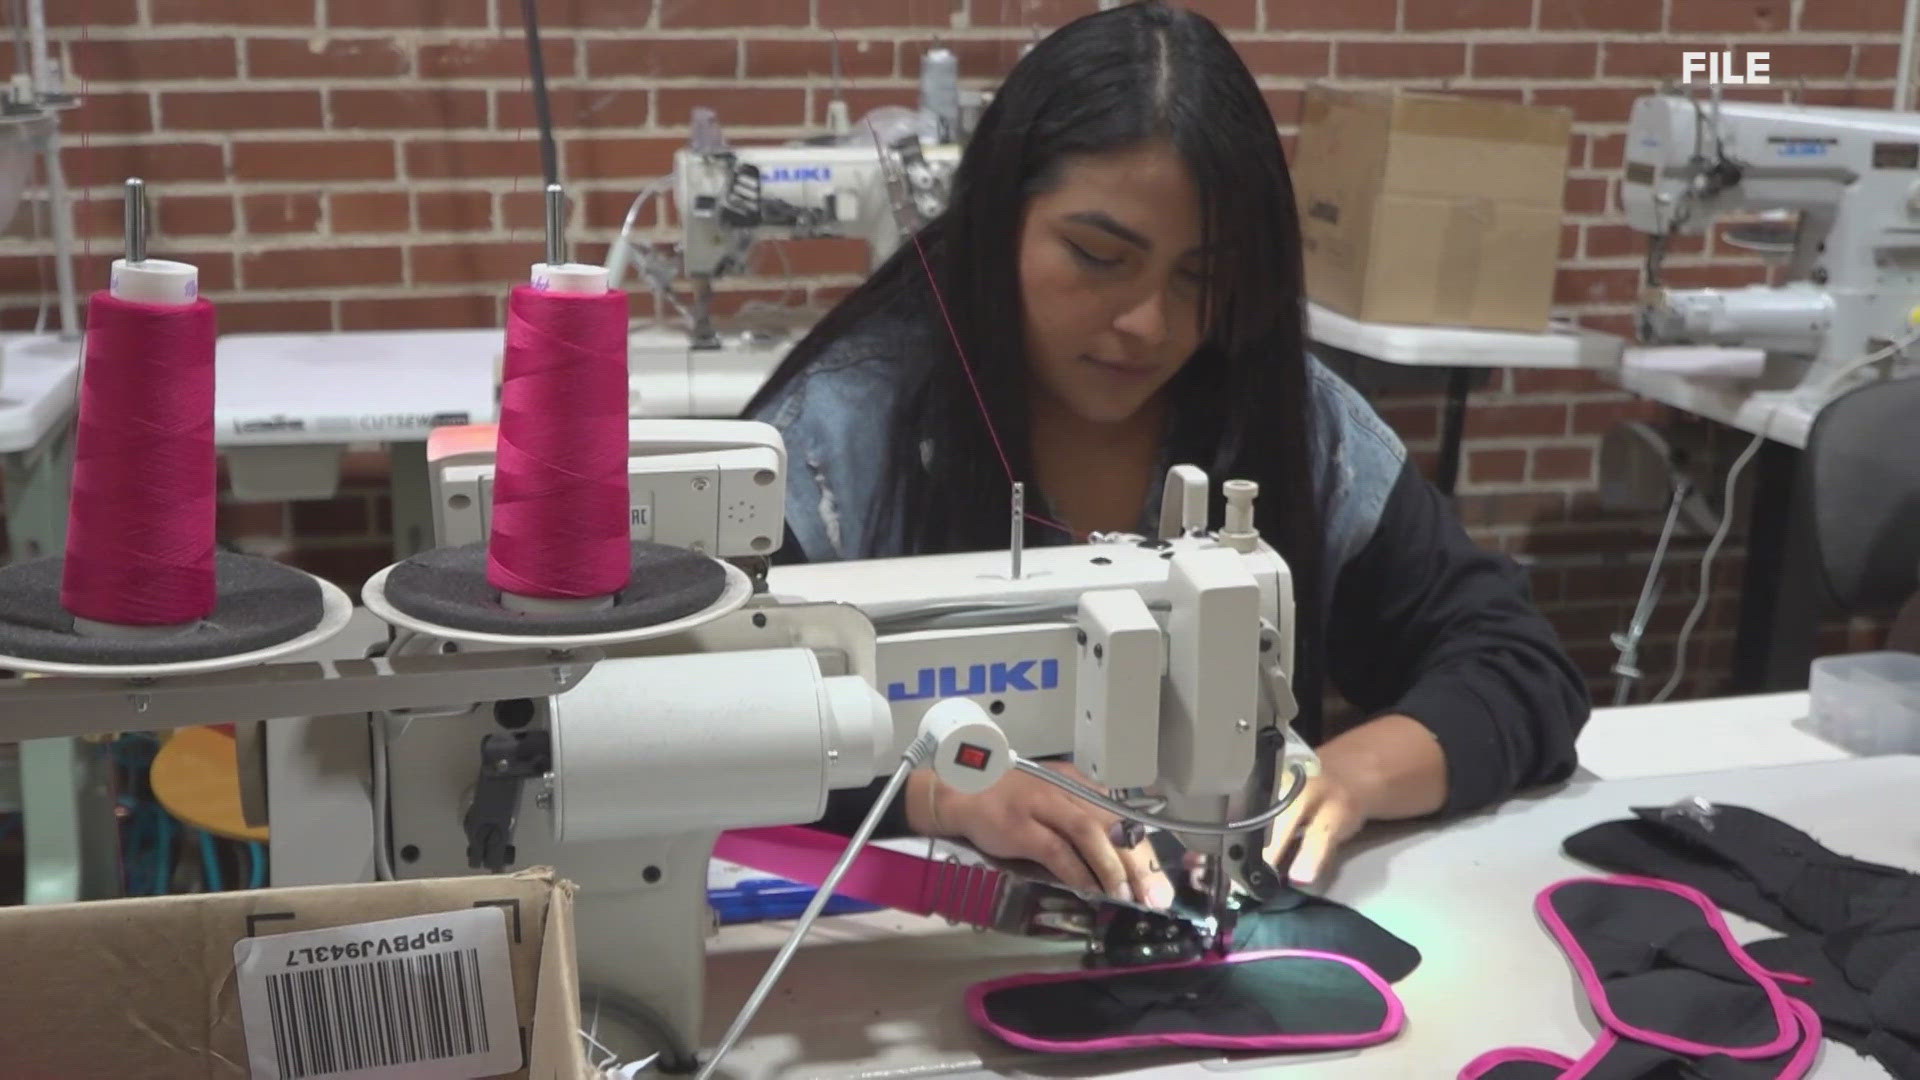 he Jefferson County Library in Arnold is hosting a free sewing workshop Wednesday. The library district hosts a few different types of crafting workshops.